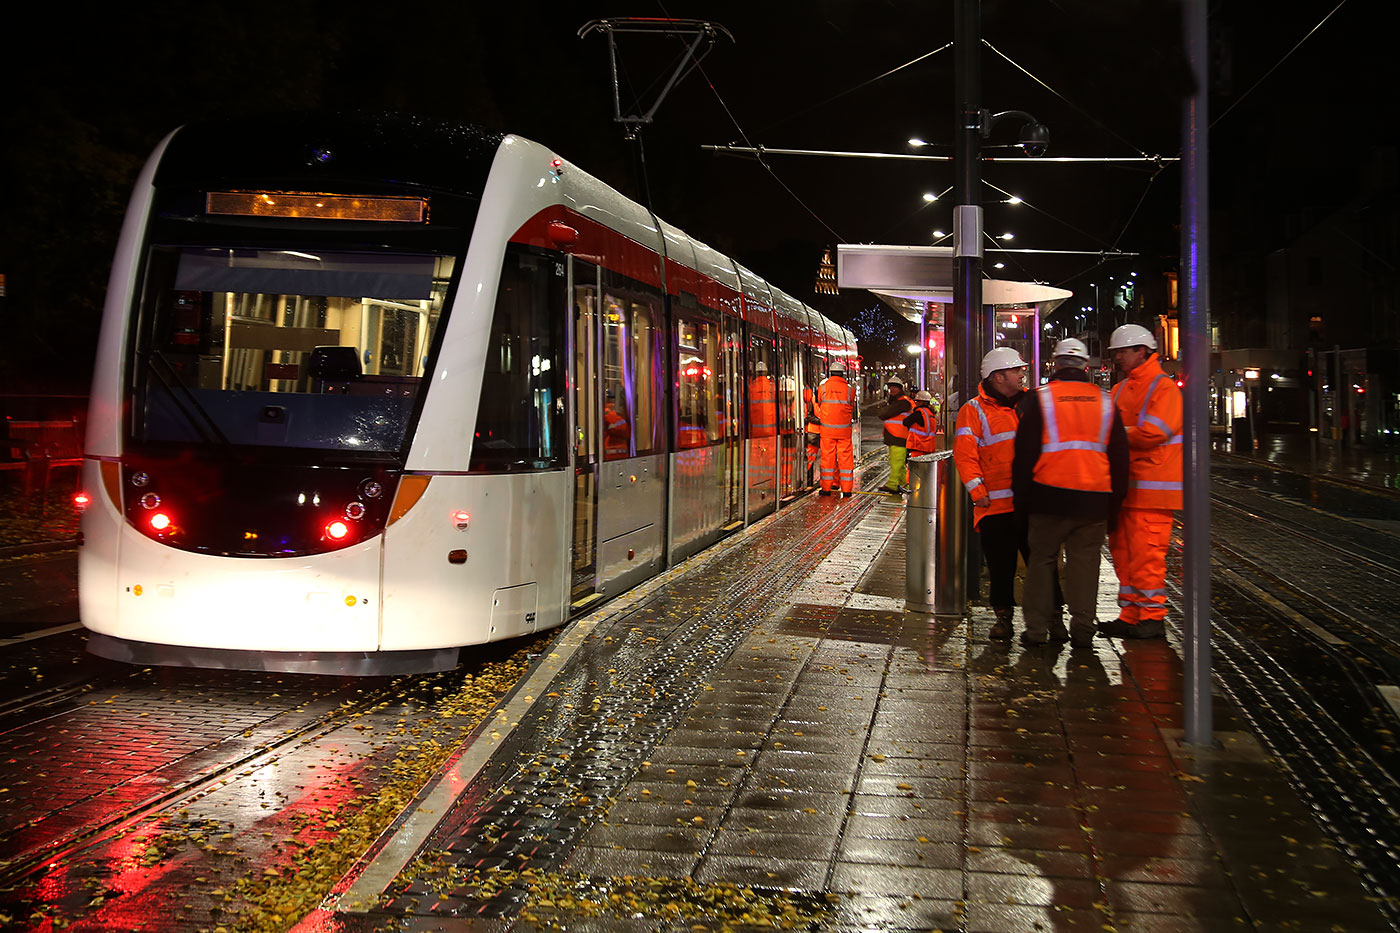 Tram Testing on December 5, 2013  -  Tram at the Princes Street tram stop, near the foot of The Mound